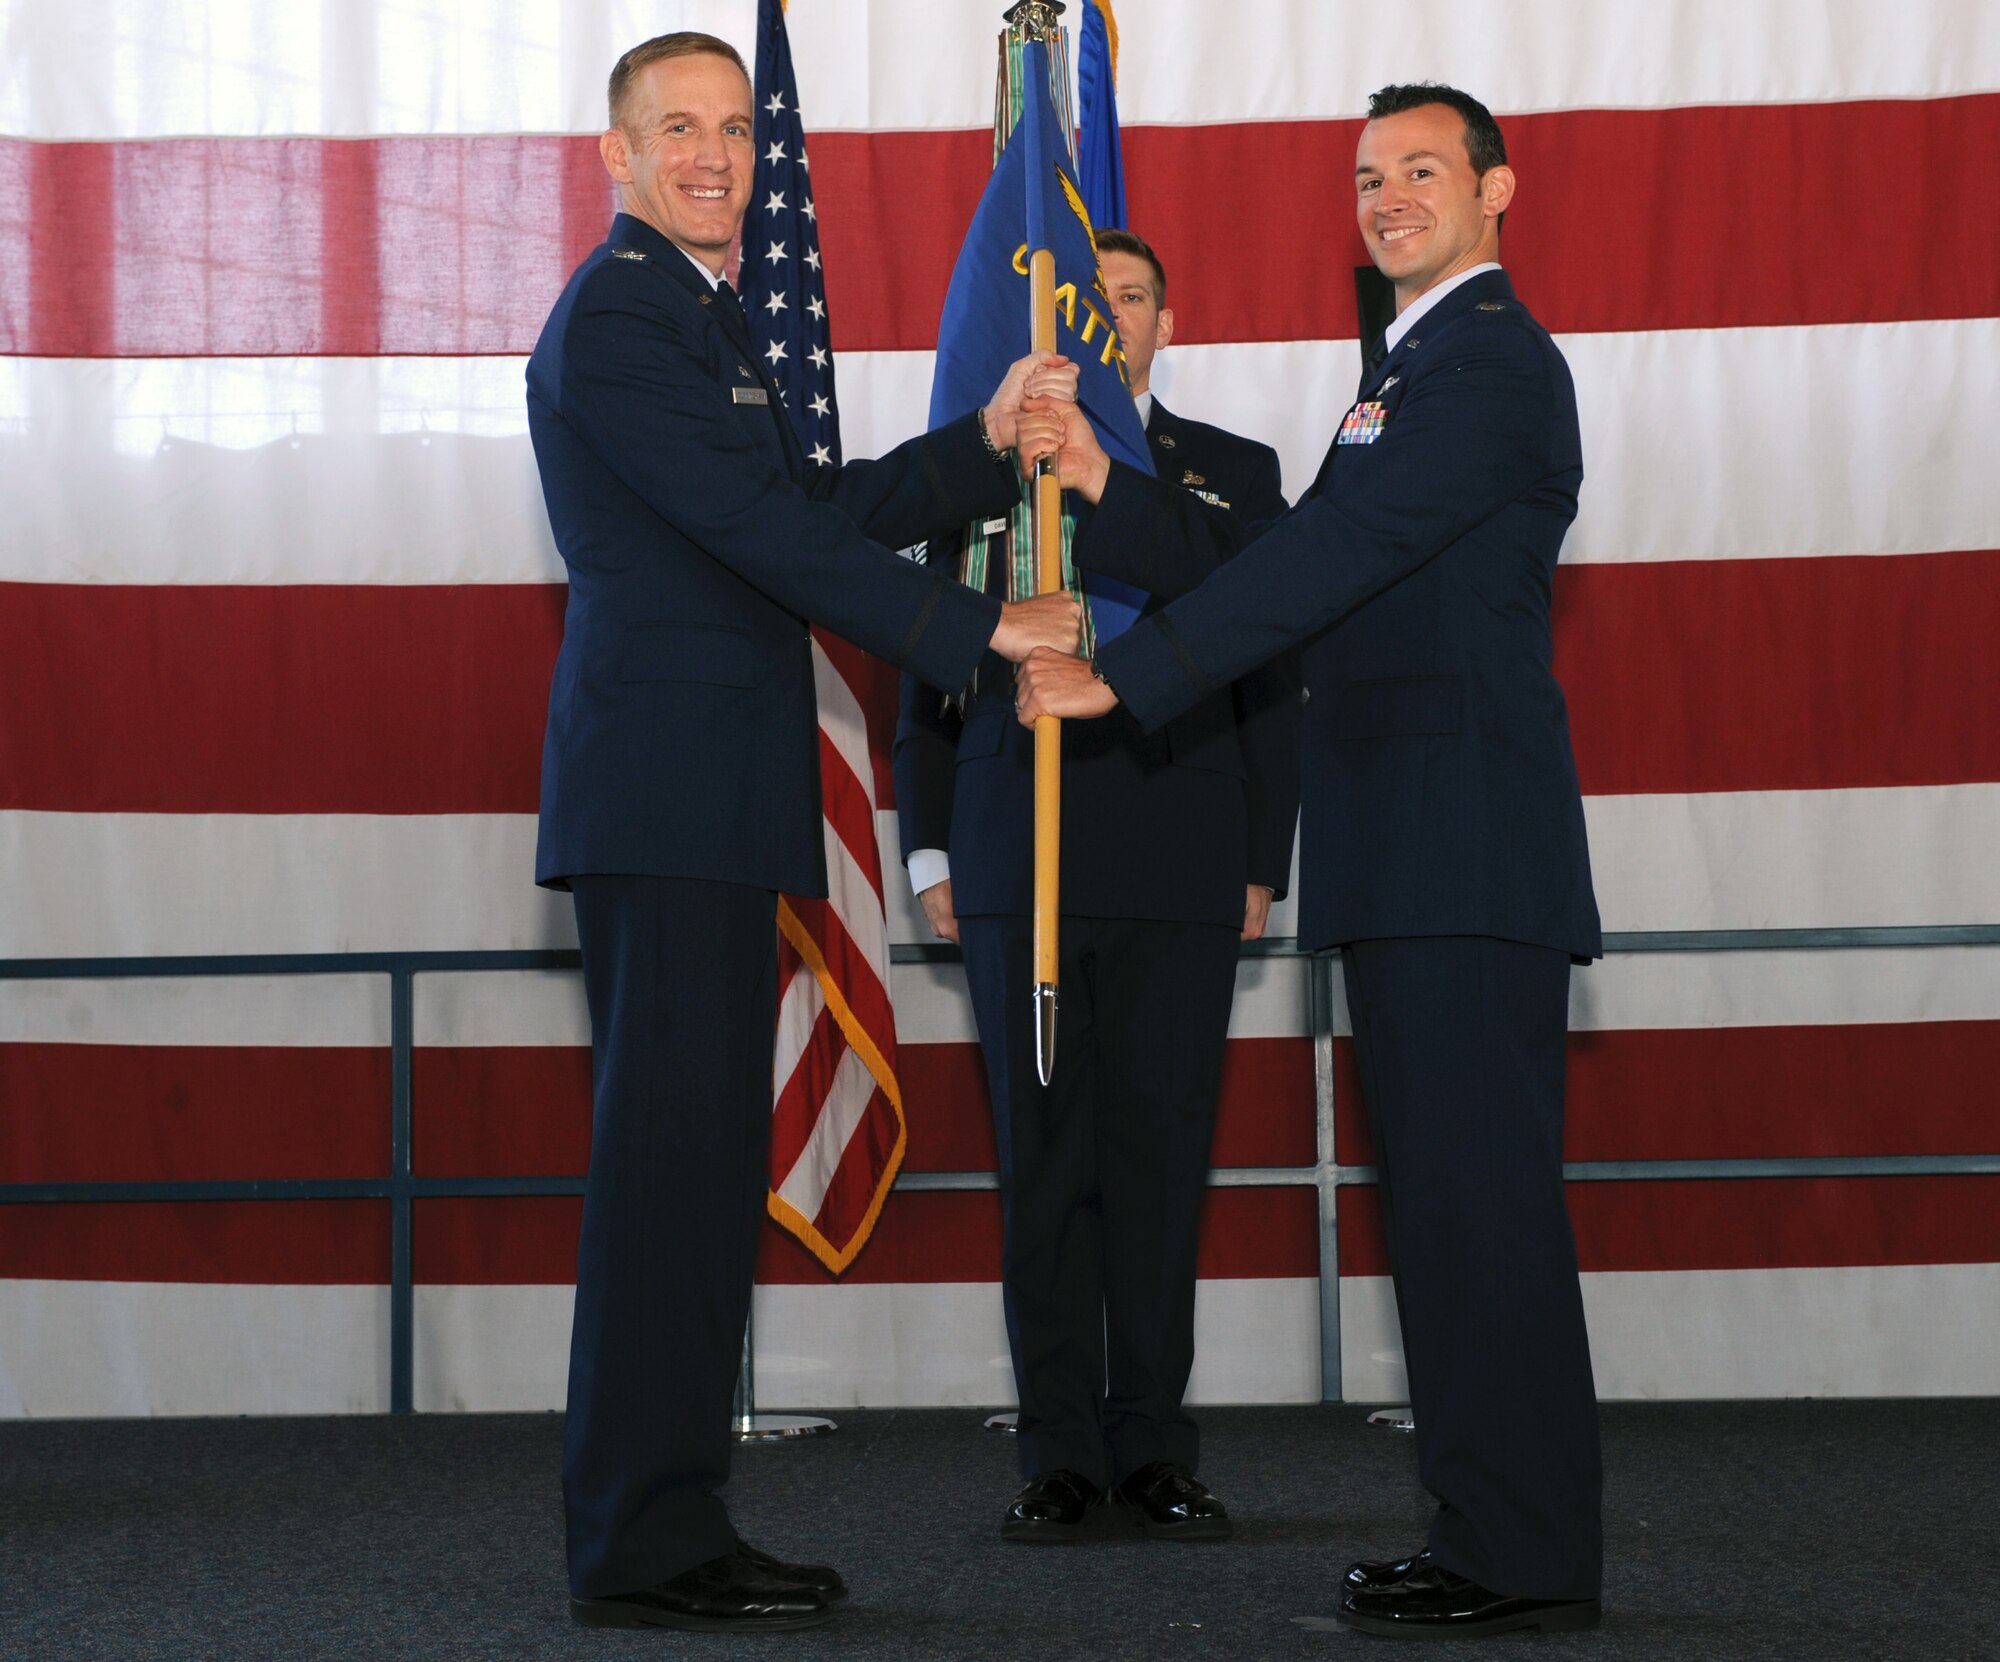 Col. Case Cunningham, 432nd Wing commander, left, hands the guidon for the 89th Attack Squadron to Lt. Col. Albert, 89th ATKS commander, during a redesignation ceremony at Ellsworth Air Force Base, S.D., June 21, 2016. With the 28th Bomb Wing being realigned under Air Force Global Strike Command from Air Combat Command in October 2015, the 432nd ATKS became a tenant unit at Ellsworth AFB and needed to be renamed. (U.S. Air Force photo by Airman 1st Class Denise M. Nevins/Released)